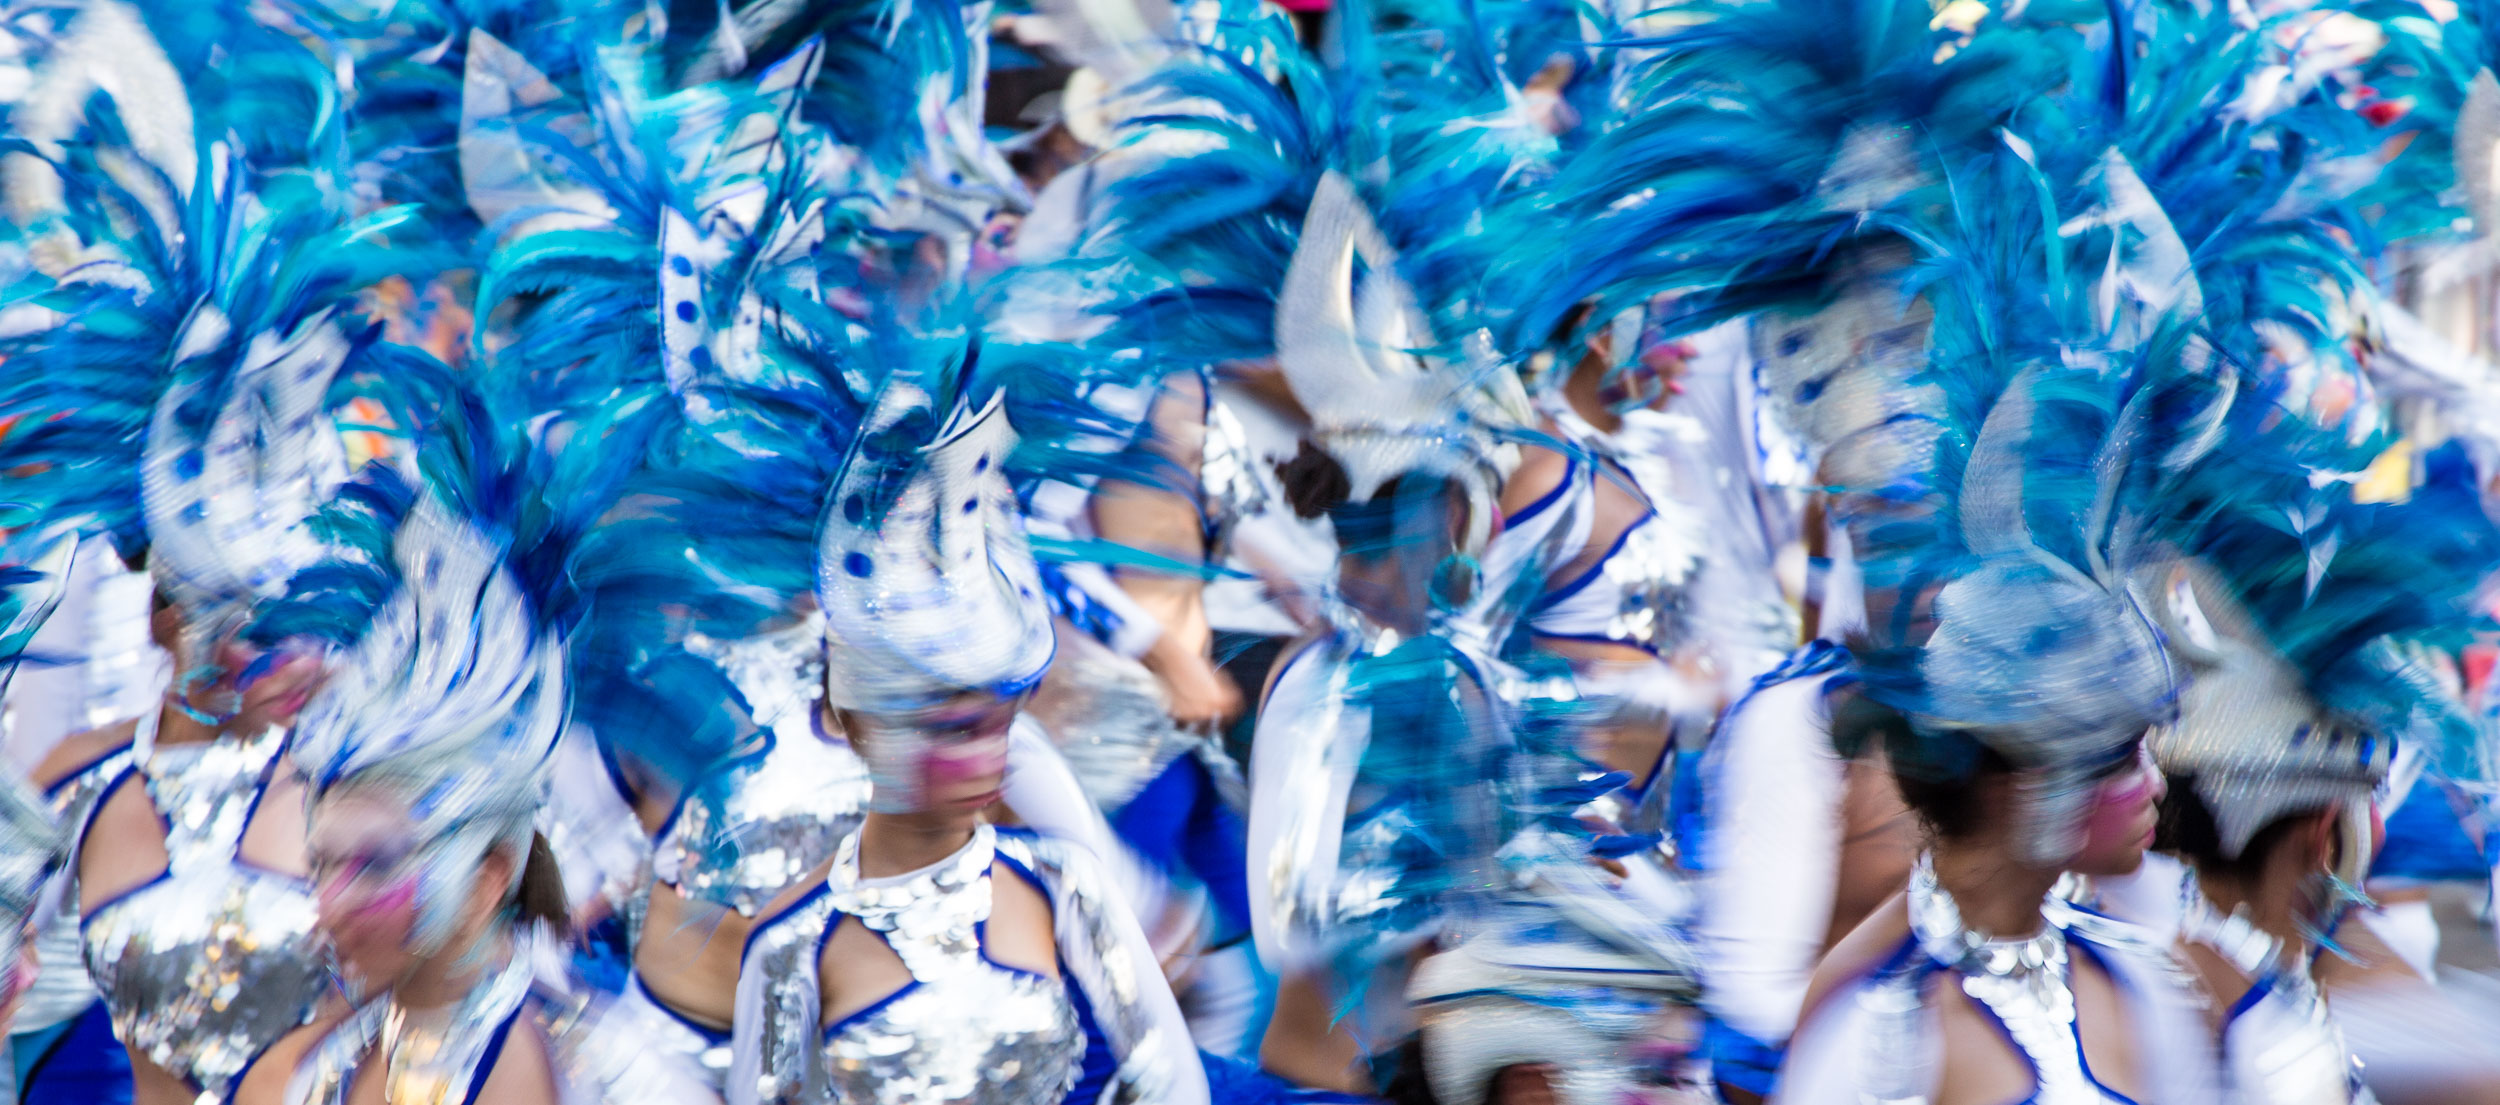 Colombia-Barranquilla-Carnival-Blue-Group